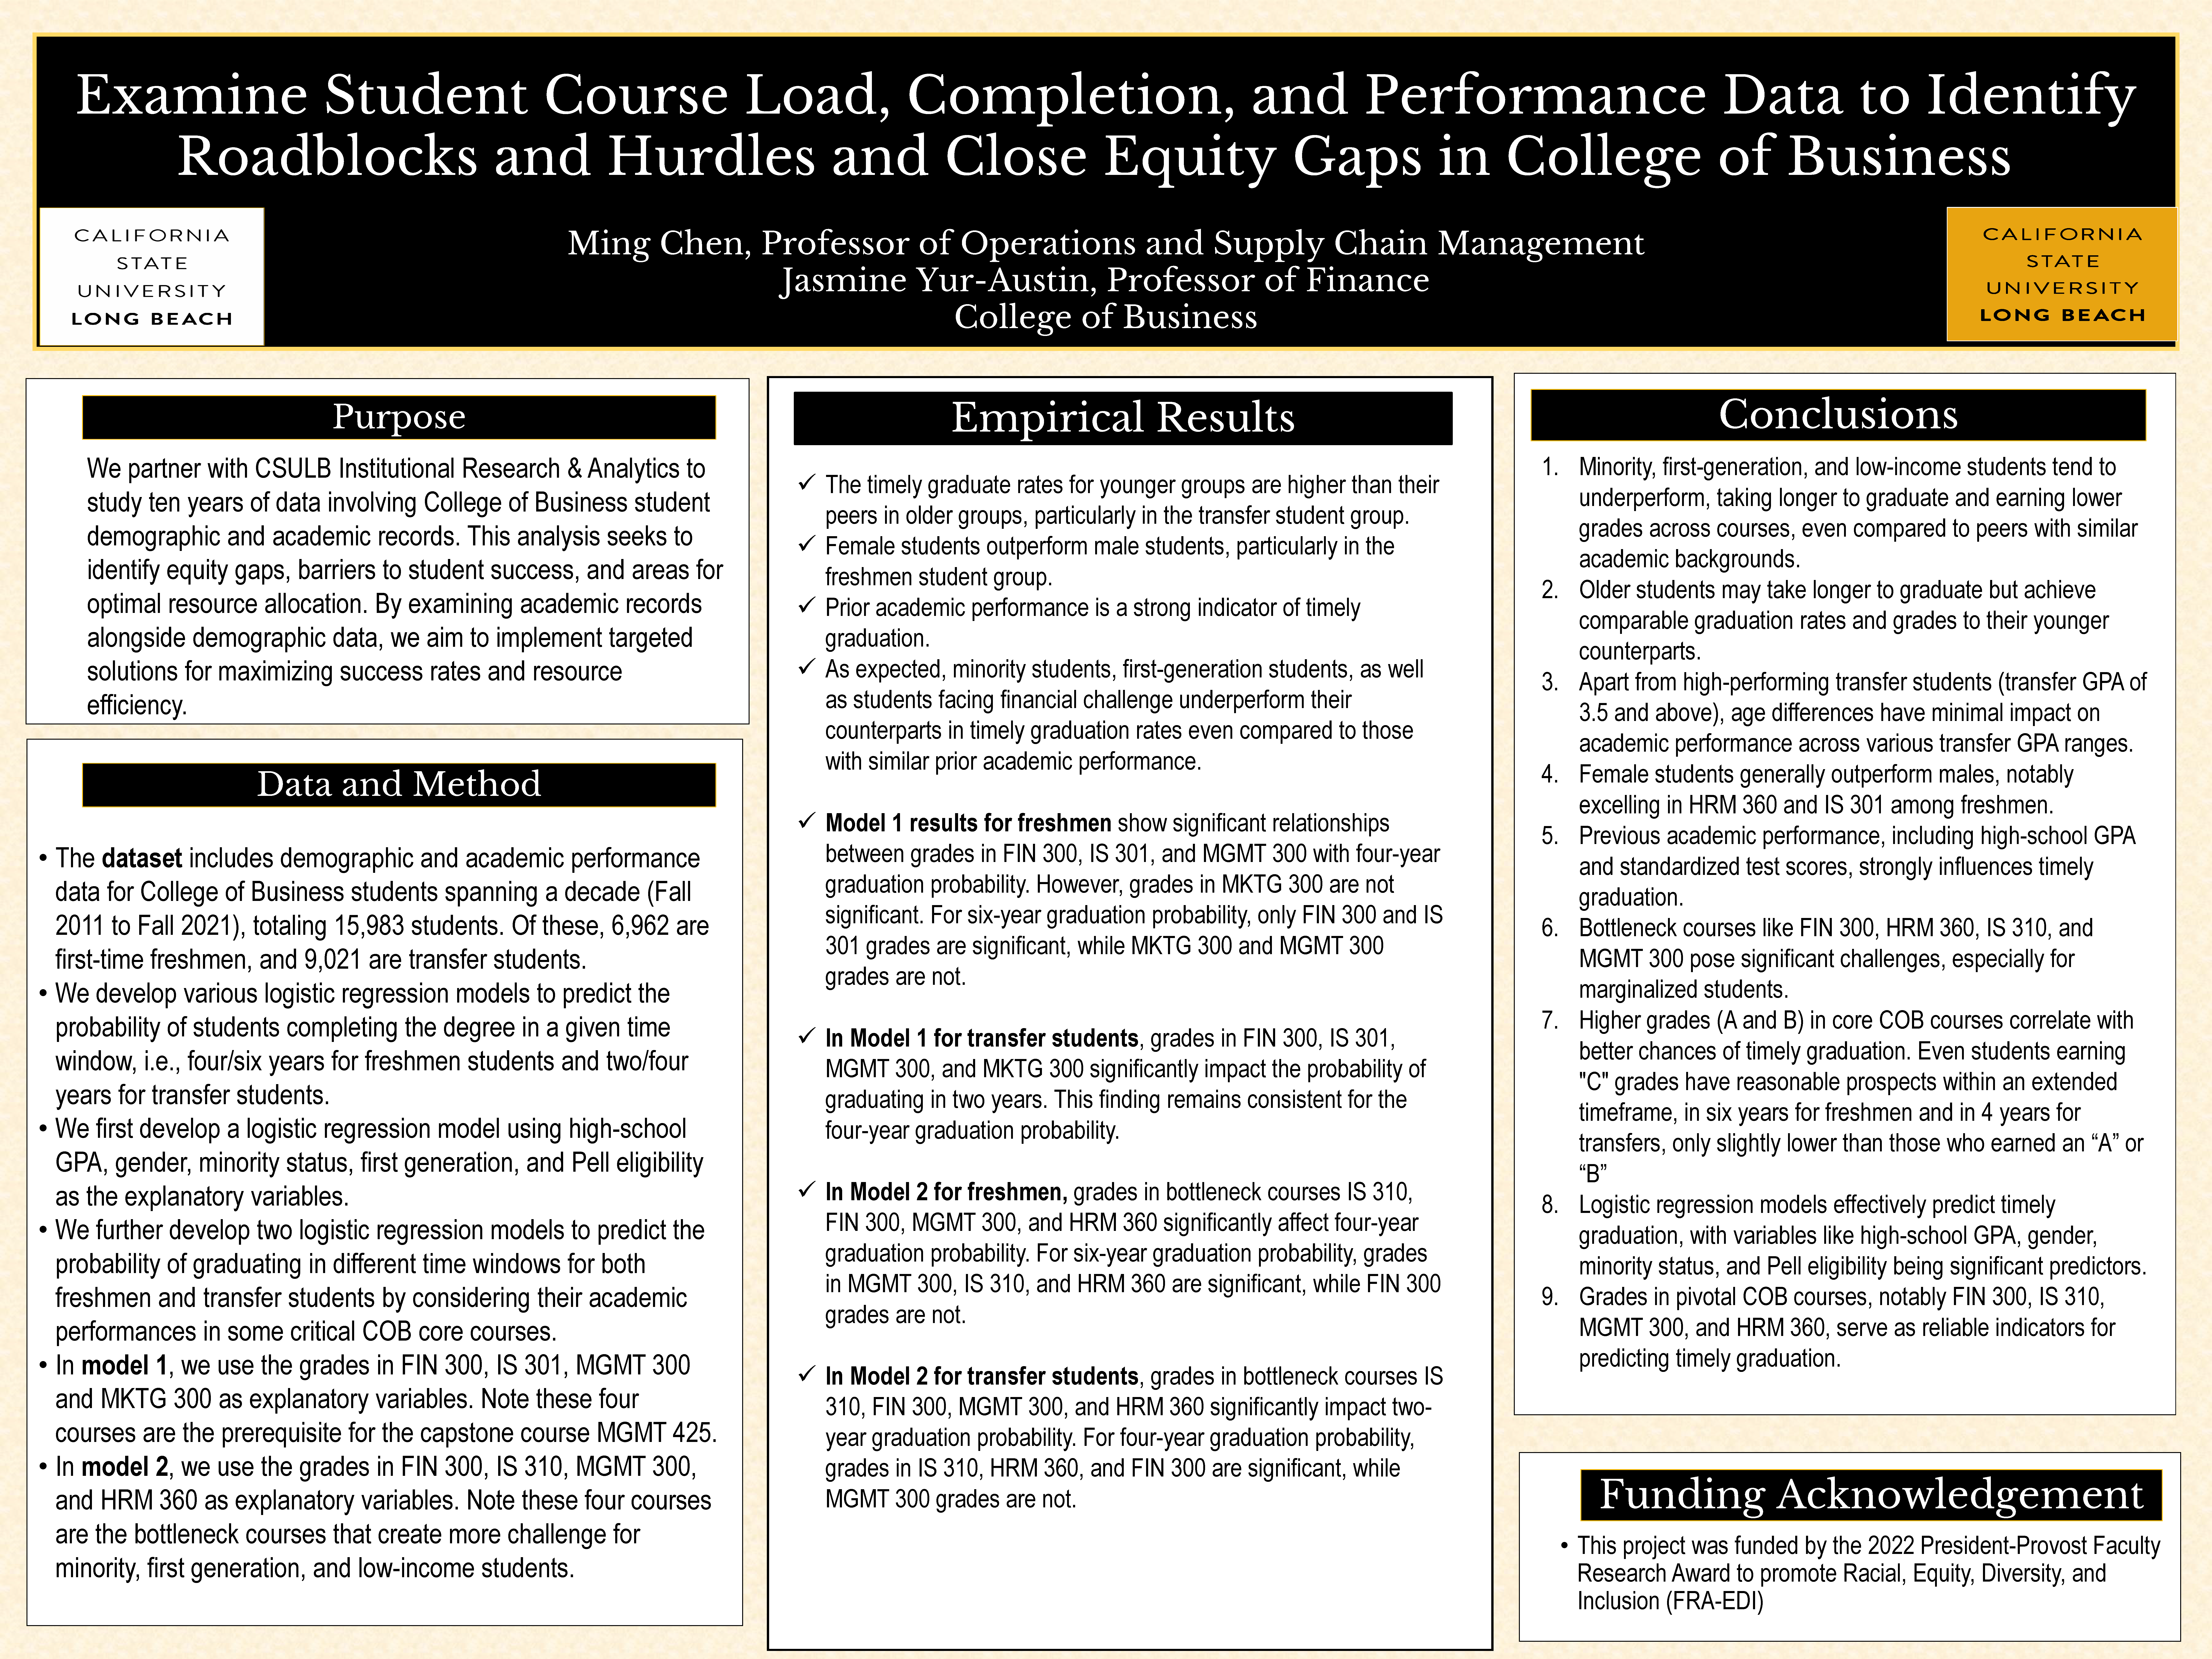 Presentation Poster of Examine Student Course Load, Completion, and Performance Data to Identify Roadblocks and Hurdles and Close Equity Gaps in College of Business